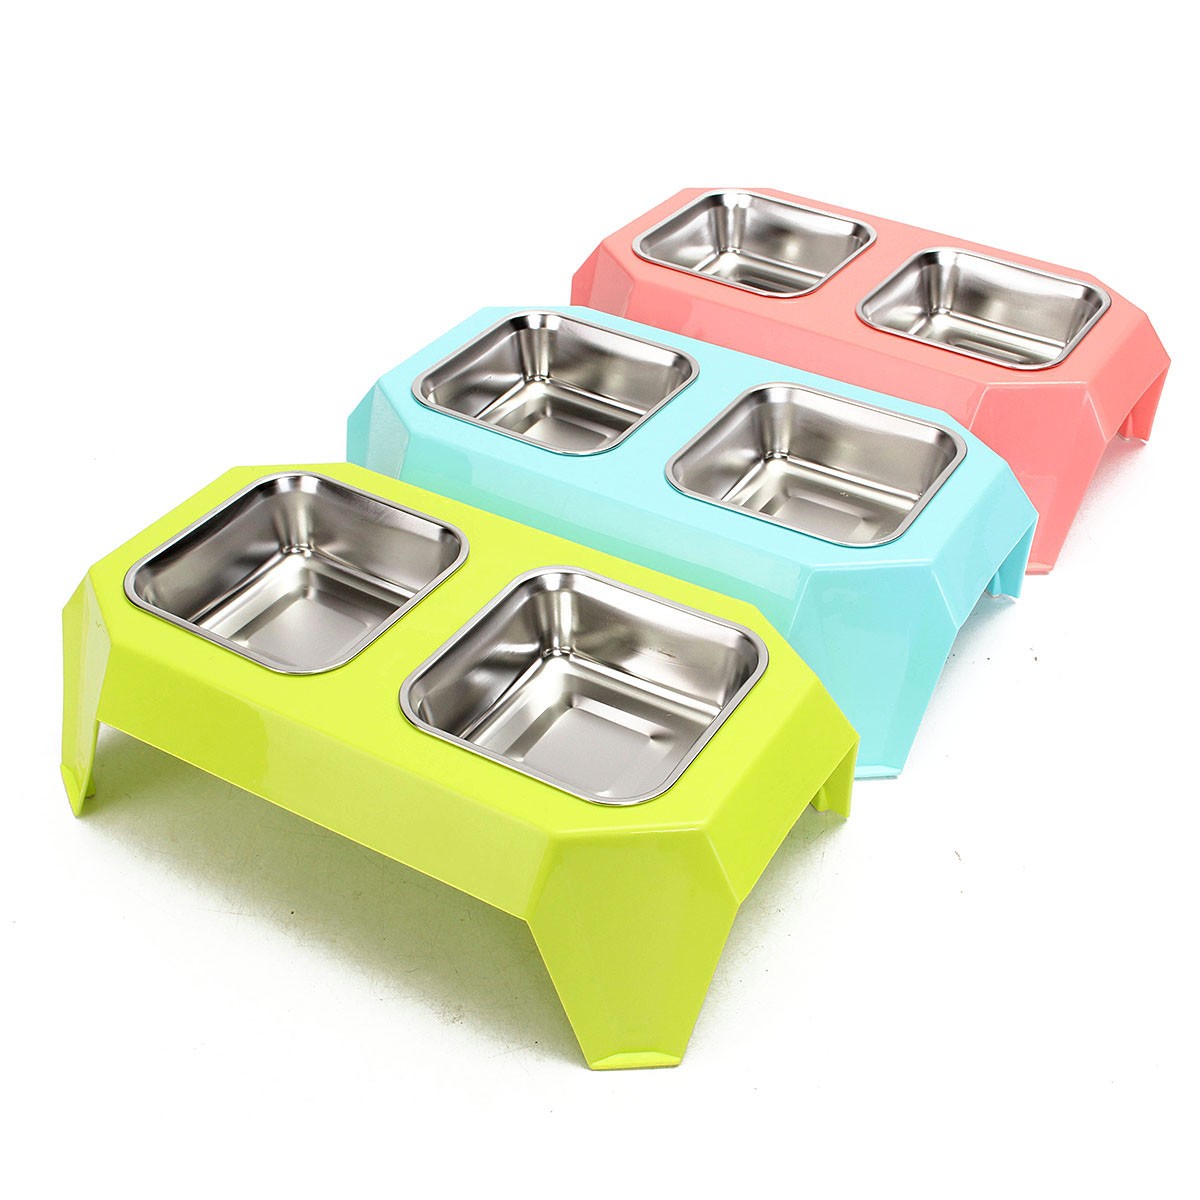 

Stainless Steel Double Pet Bowl Food Water Feeder for Dog Puppy Cats Pets Supplies Feeding Dishes